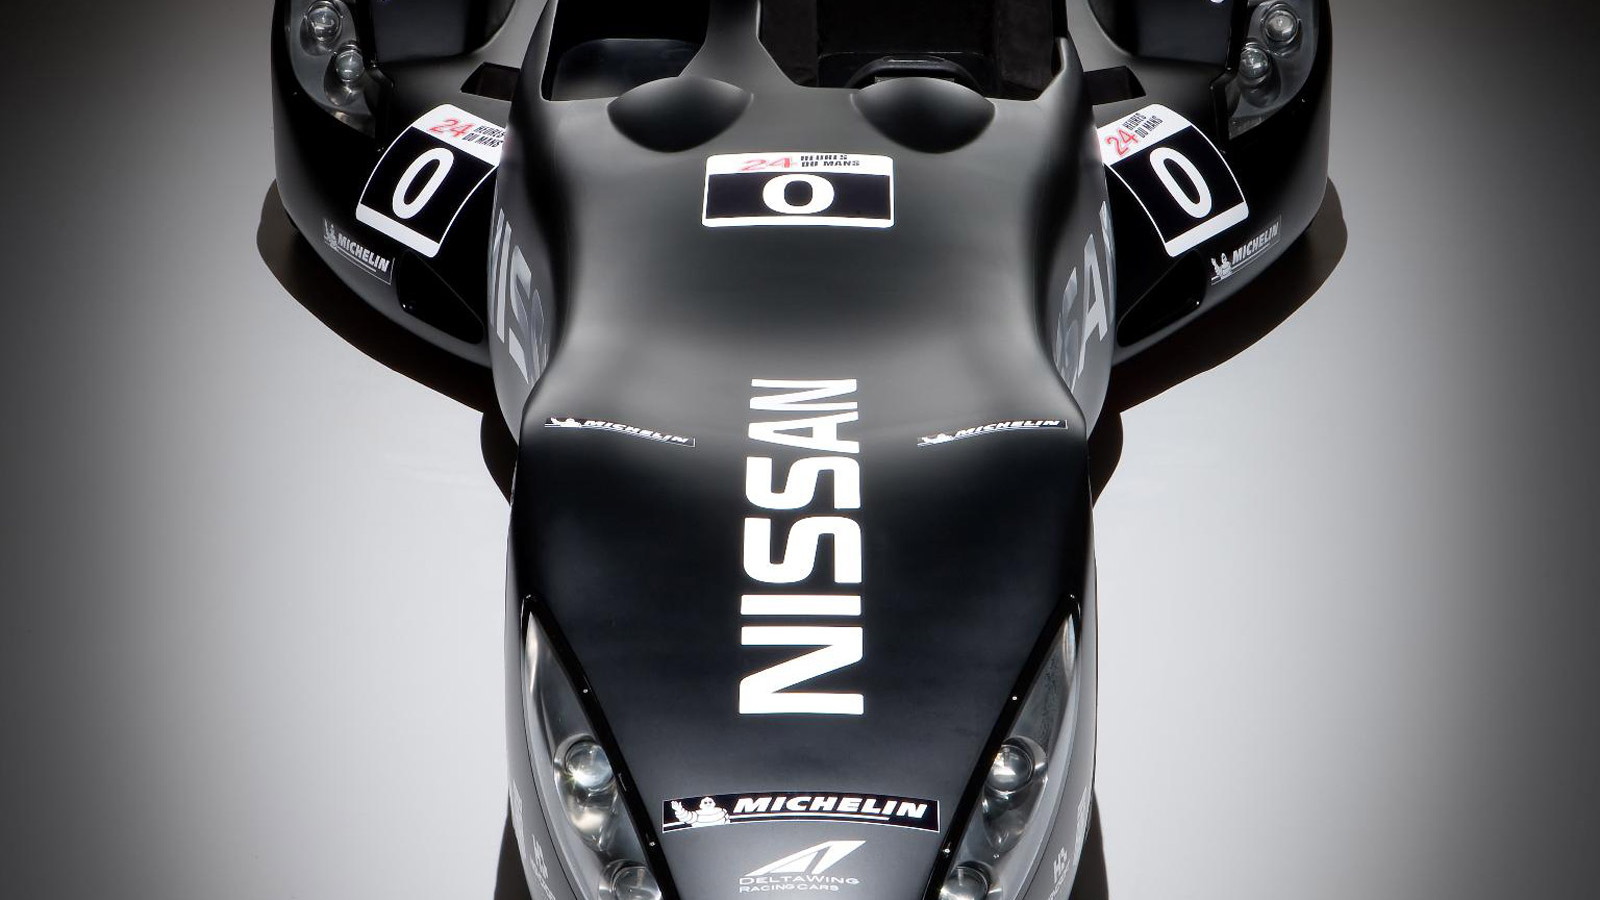 2012 Nissan DeltaWing project